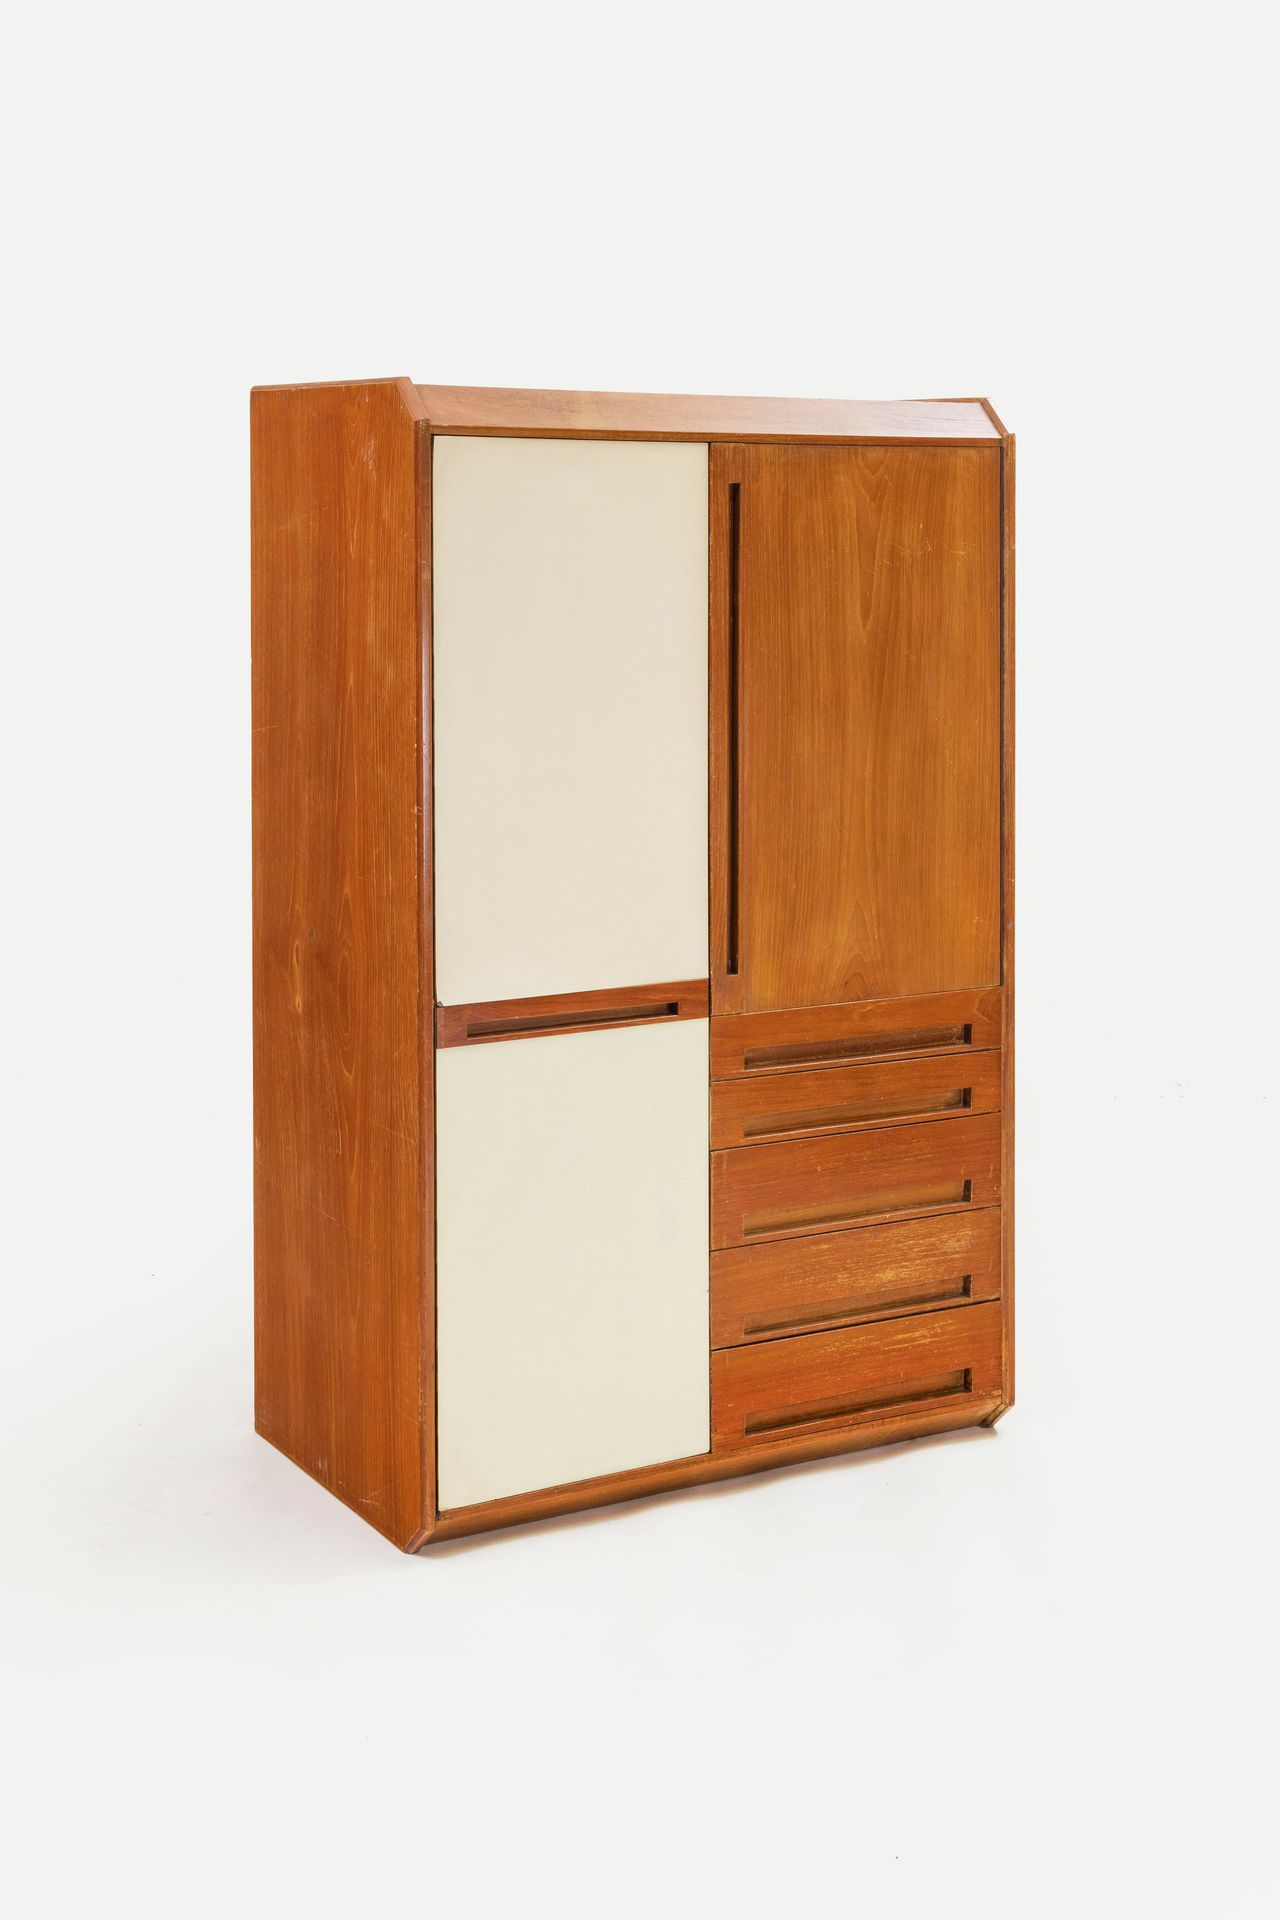 SPARTACO BRUGNOLI Closet. Stained wood, formica. Italy c. 1960.
165x105x60 cm.
A&hellip;